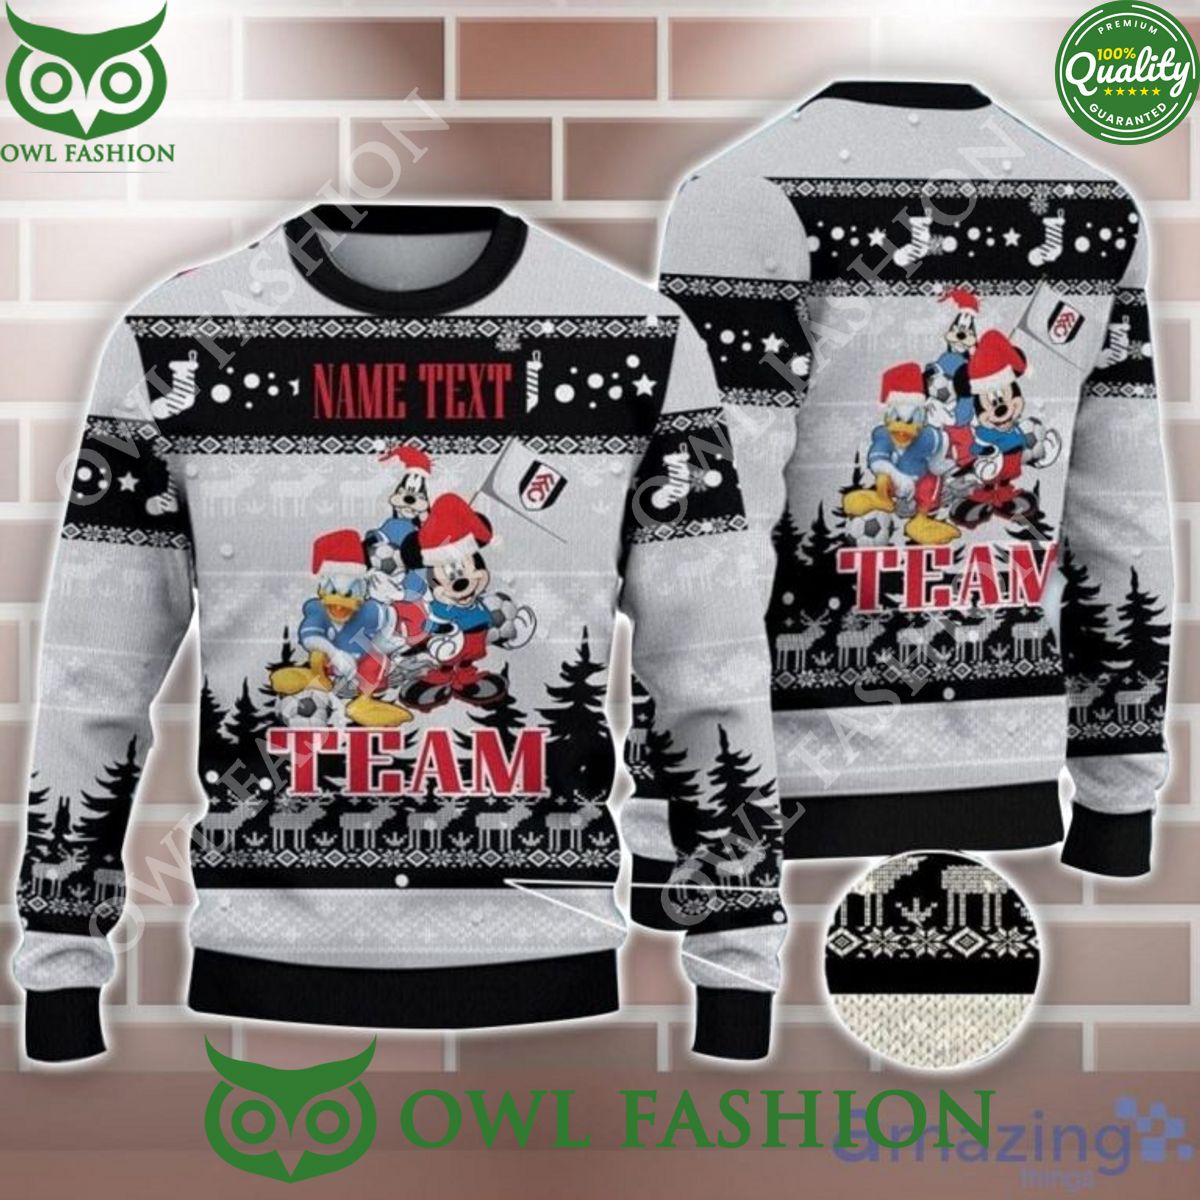 Disney Team Fulham FC Customized Ugly Christmas Sweater Jumper